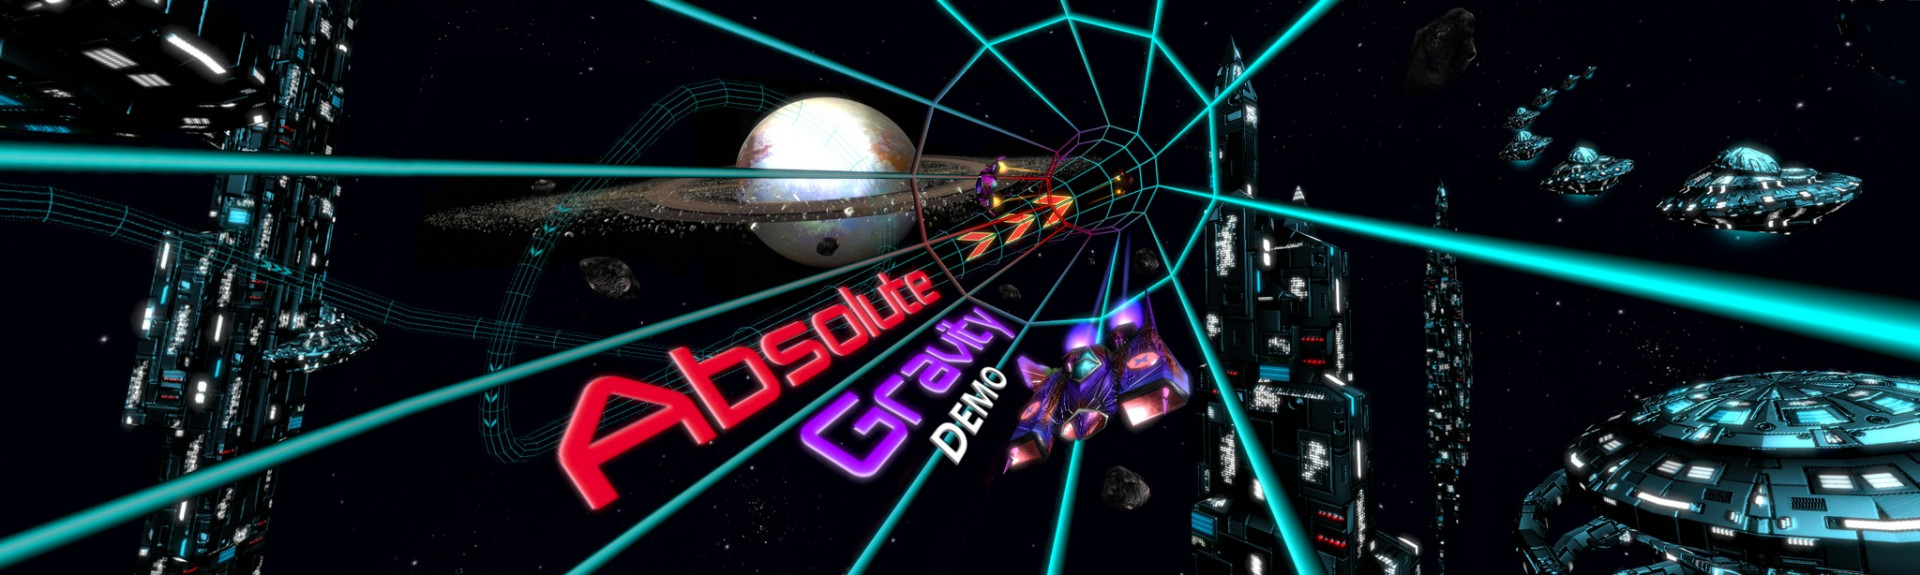 Absolute Gravity - Demo